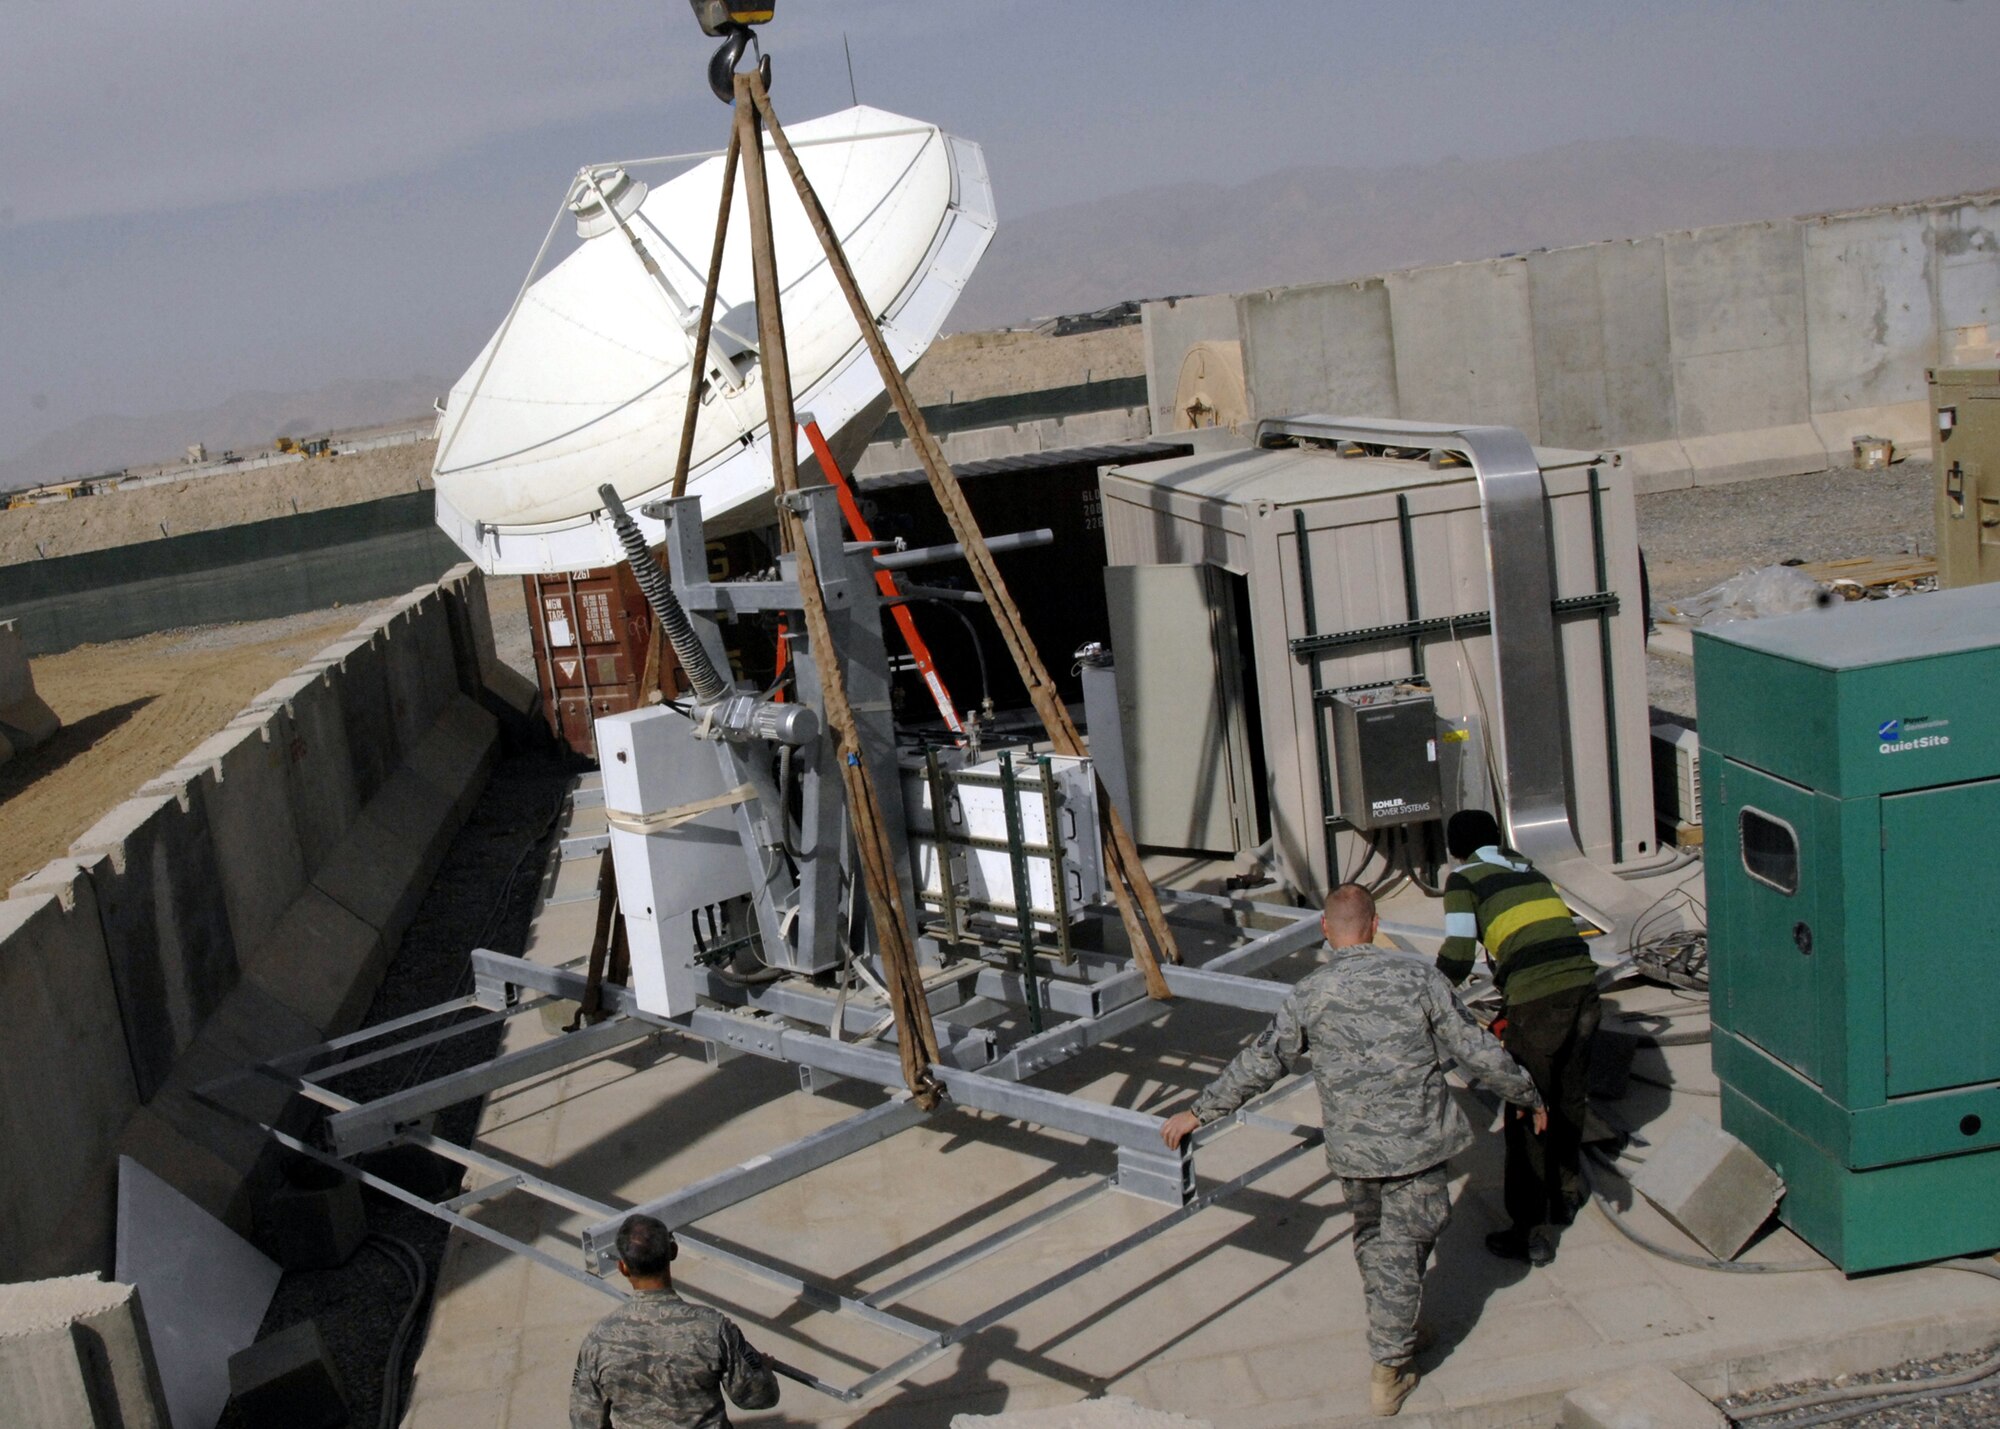 Airmen from the 451st Expeditionary Communications Squadron rotate a satellite dish load frame into its new position, Jan. 13, 2010. This was done as part of a theater-wide satellite realignment and provides redundancy as well as more bandwidth to the theater. This satellite allows for the availability of communications for U.S. Air Force personnel on Kandahar. (U.S. Air Force photo/Senior Airman Timothy Taylor/Released)